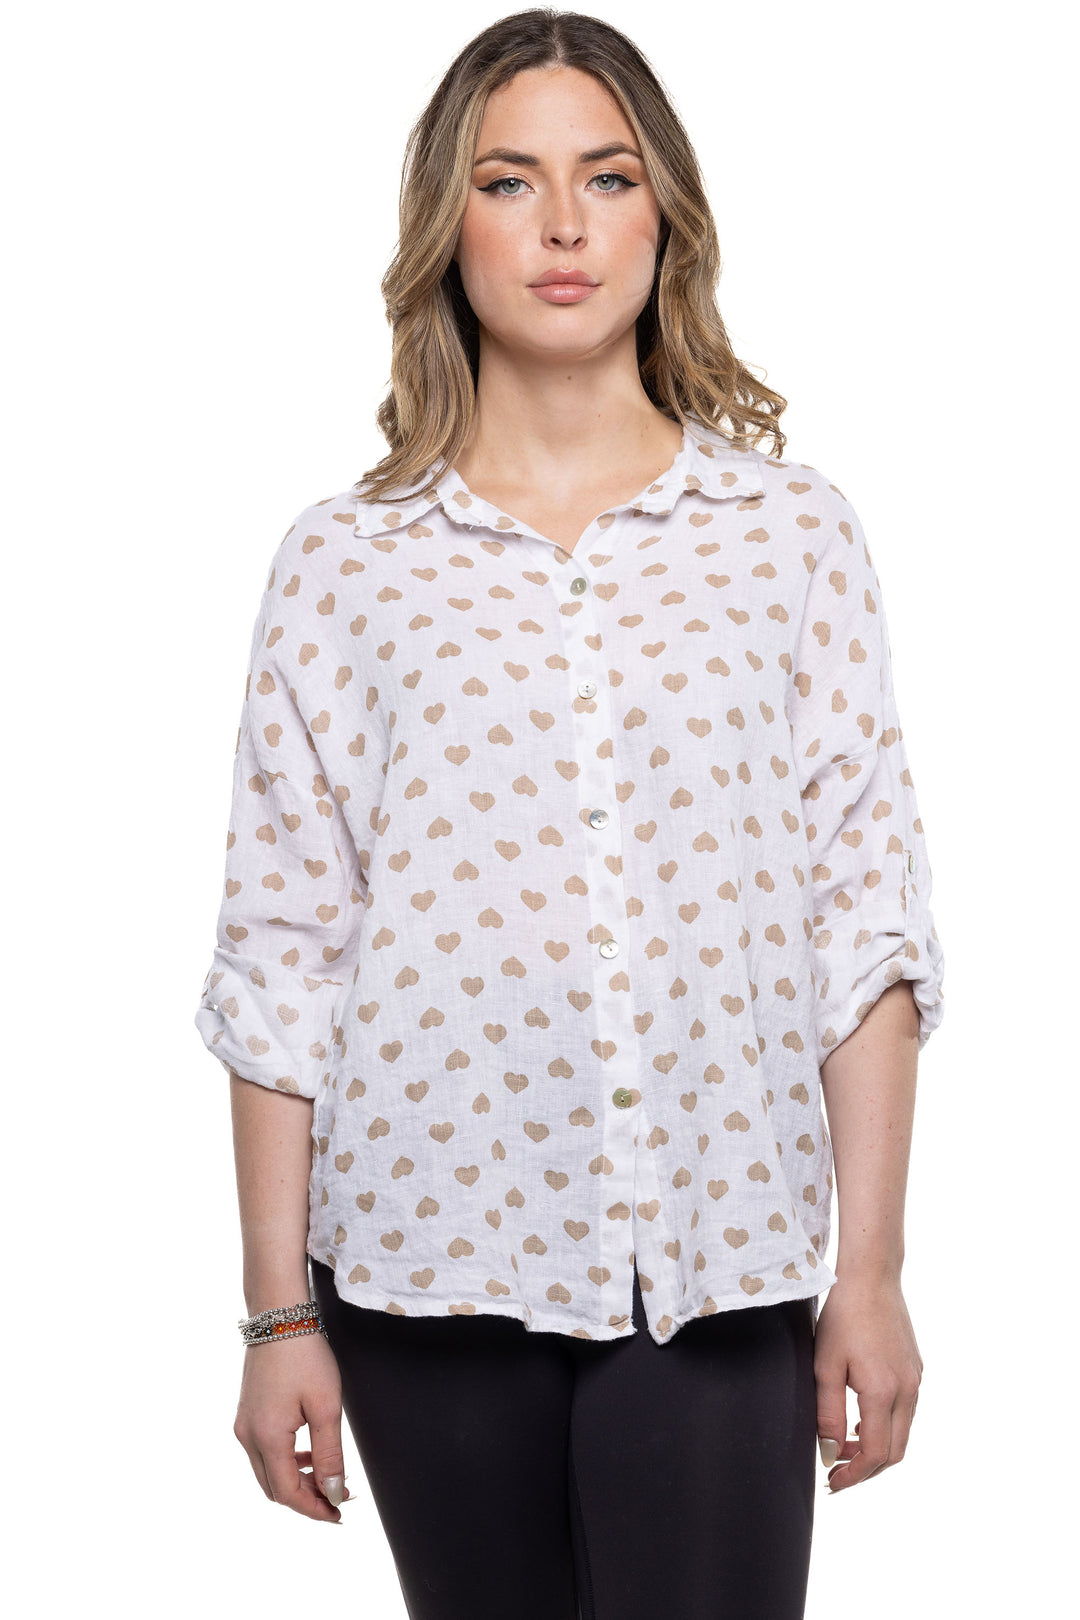 Etern Elle Summer 2024 Tie it up for a cool look that exudes style and versatility. Perfect for any occasion, this blouse offers both comfort and fashion-forward elements.